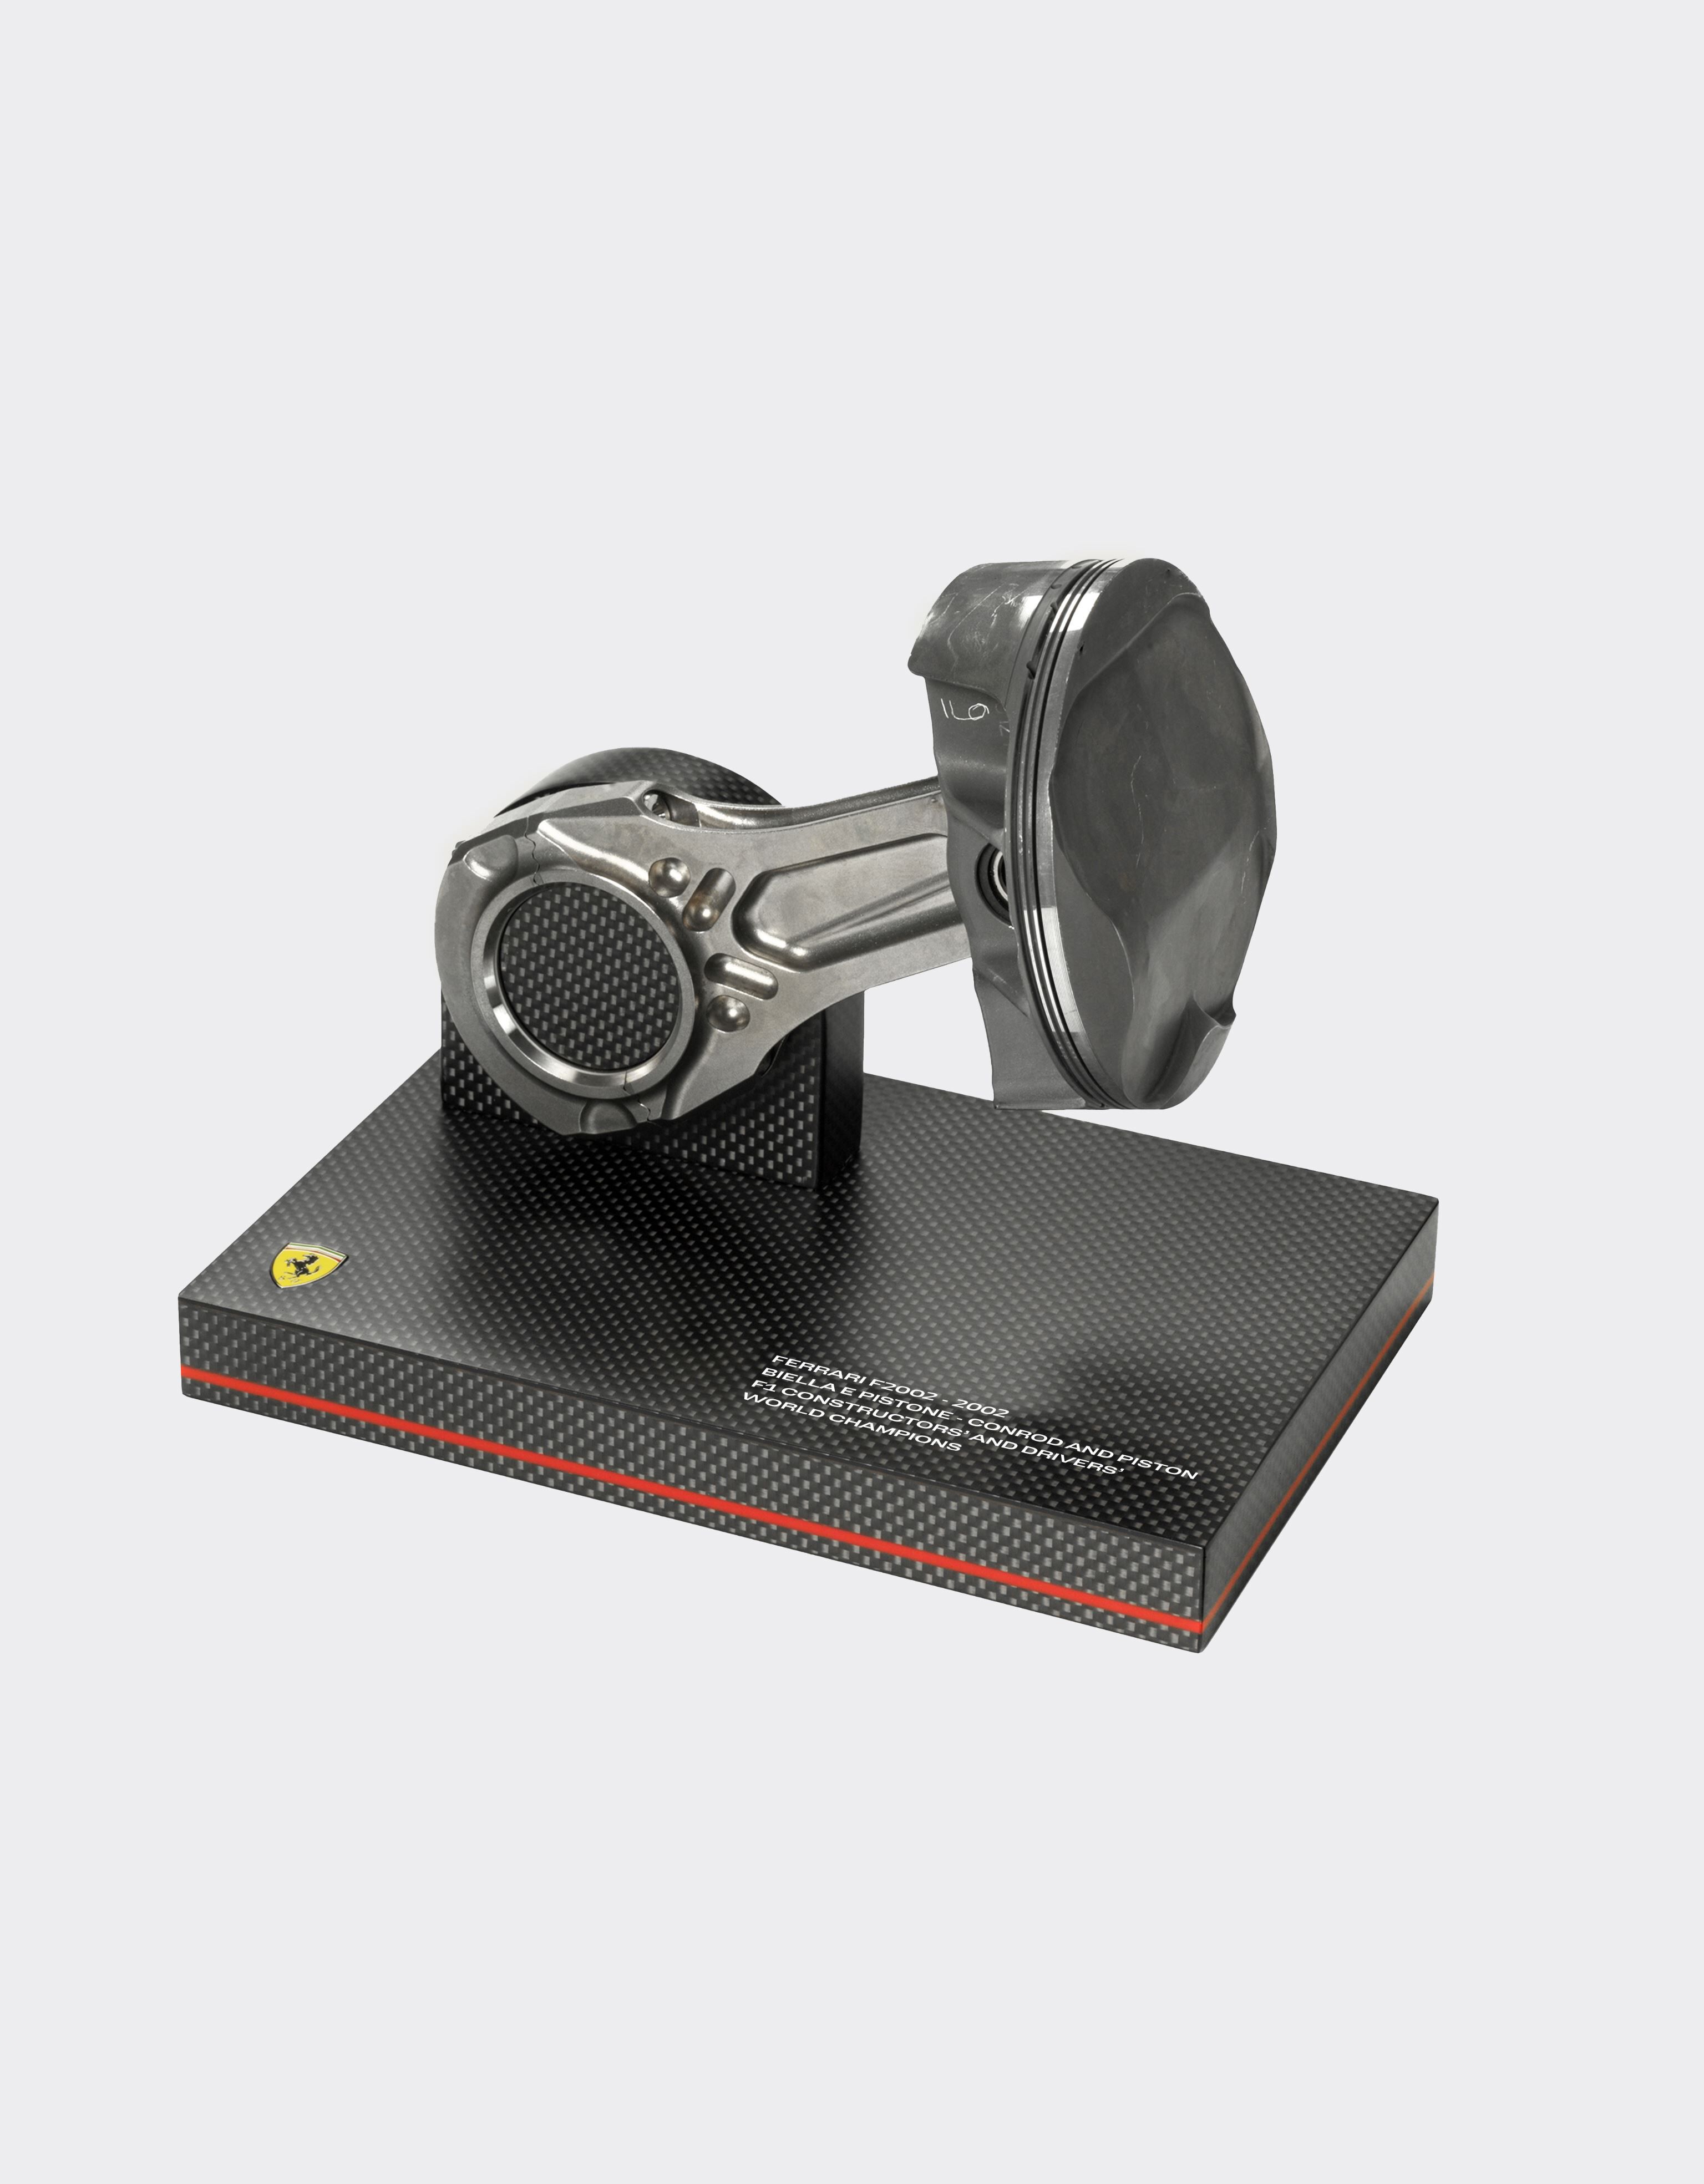 Ferrari Original connecting rod and piston set from the F2002, winner of the 2002 Constructors’ and Drivers’ Championships Red F1348f